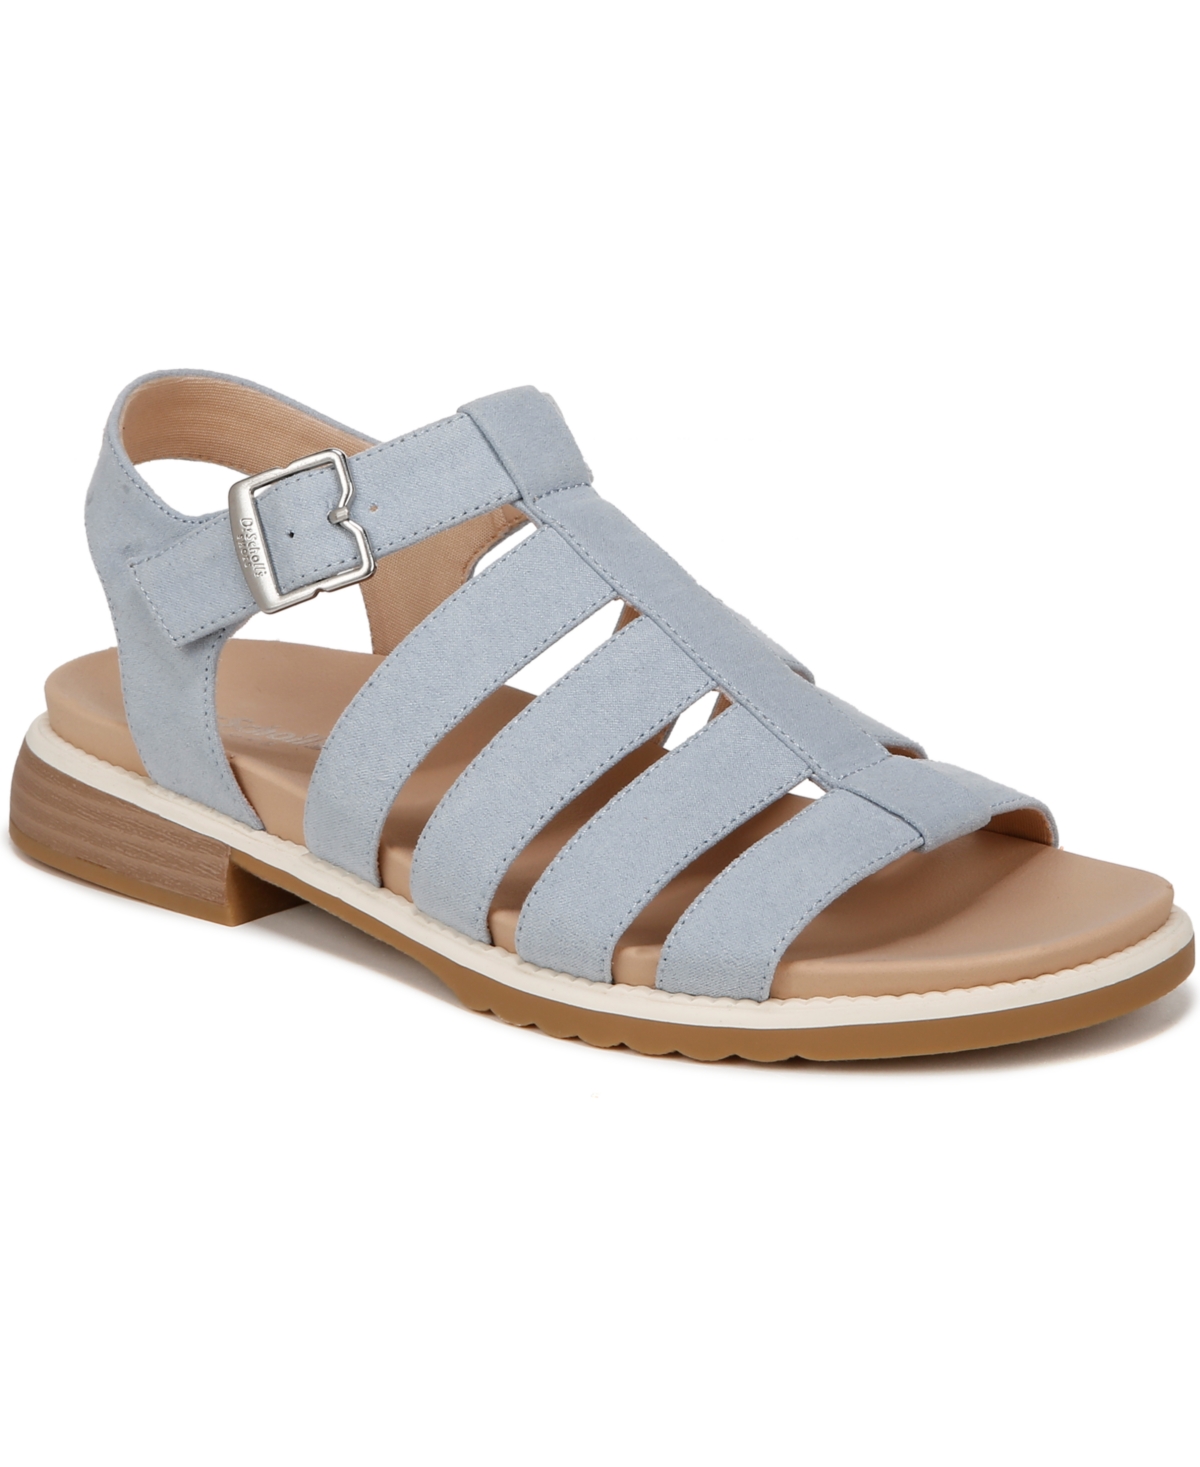 Women's A Ok Fisherman Sandals - Brown Faux Leather